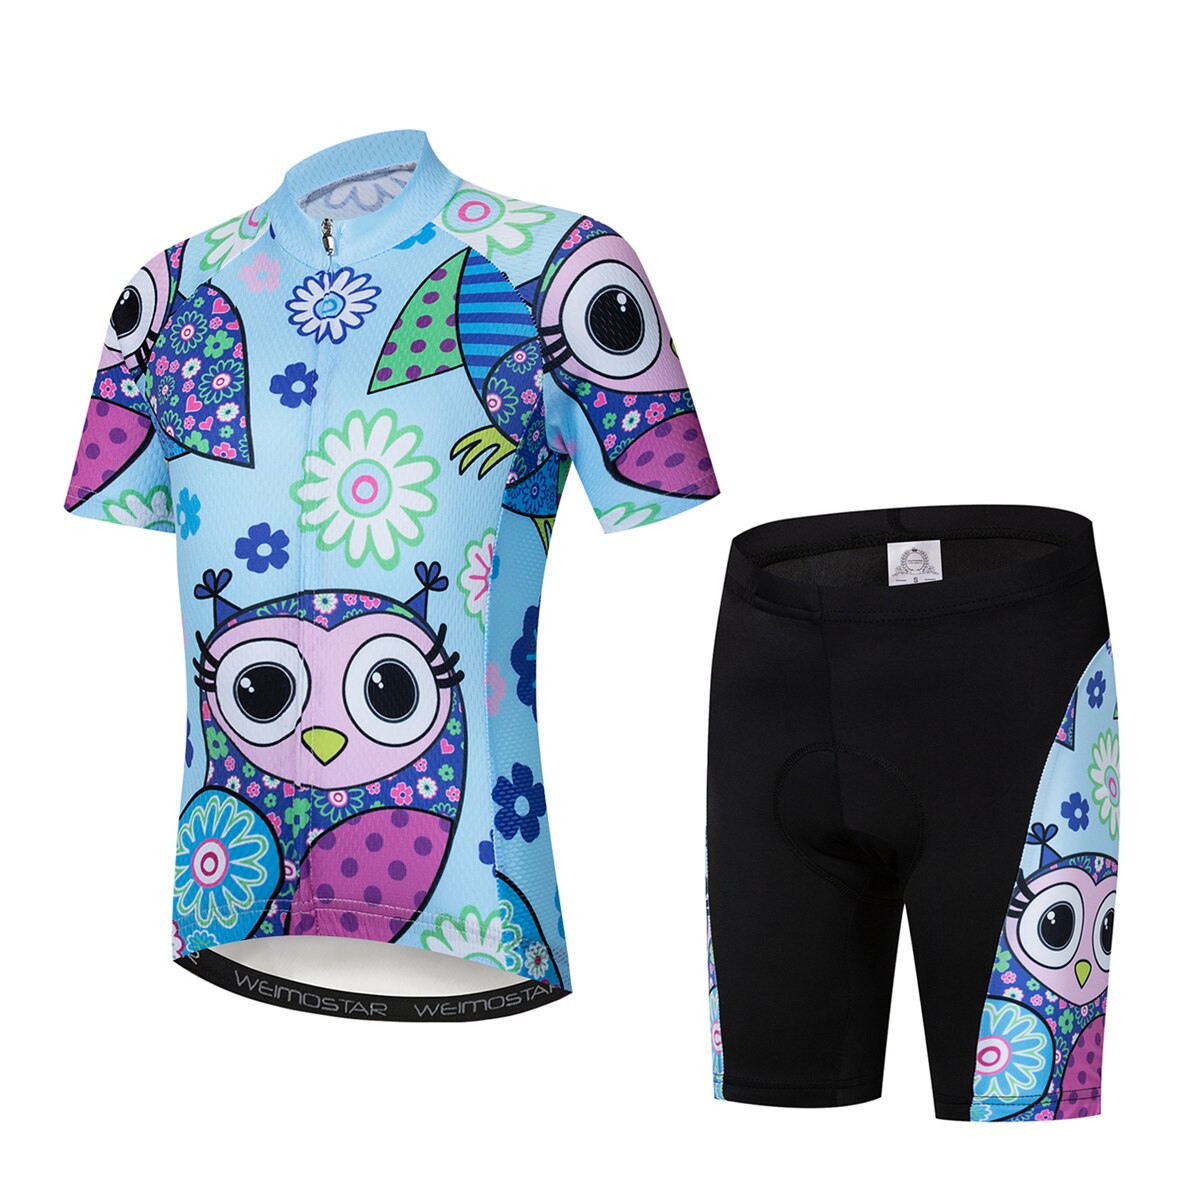 Kids Bike Clothing Breathable Bicycle Girl Or Boy Bicycle Suits Quick Dry BIKE FIELD